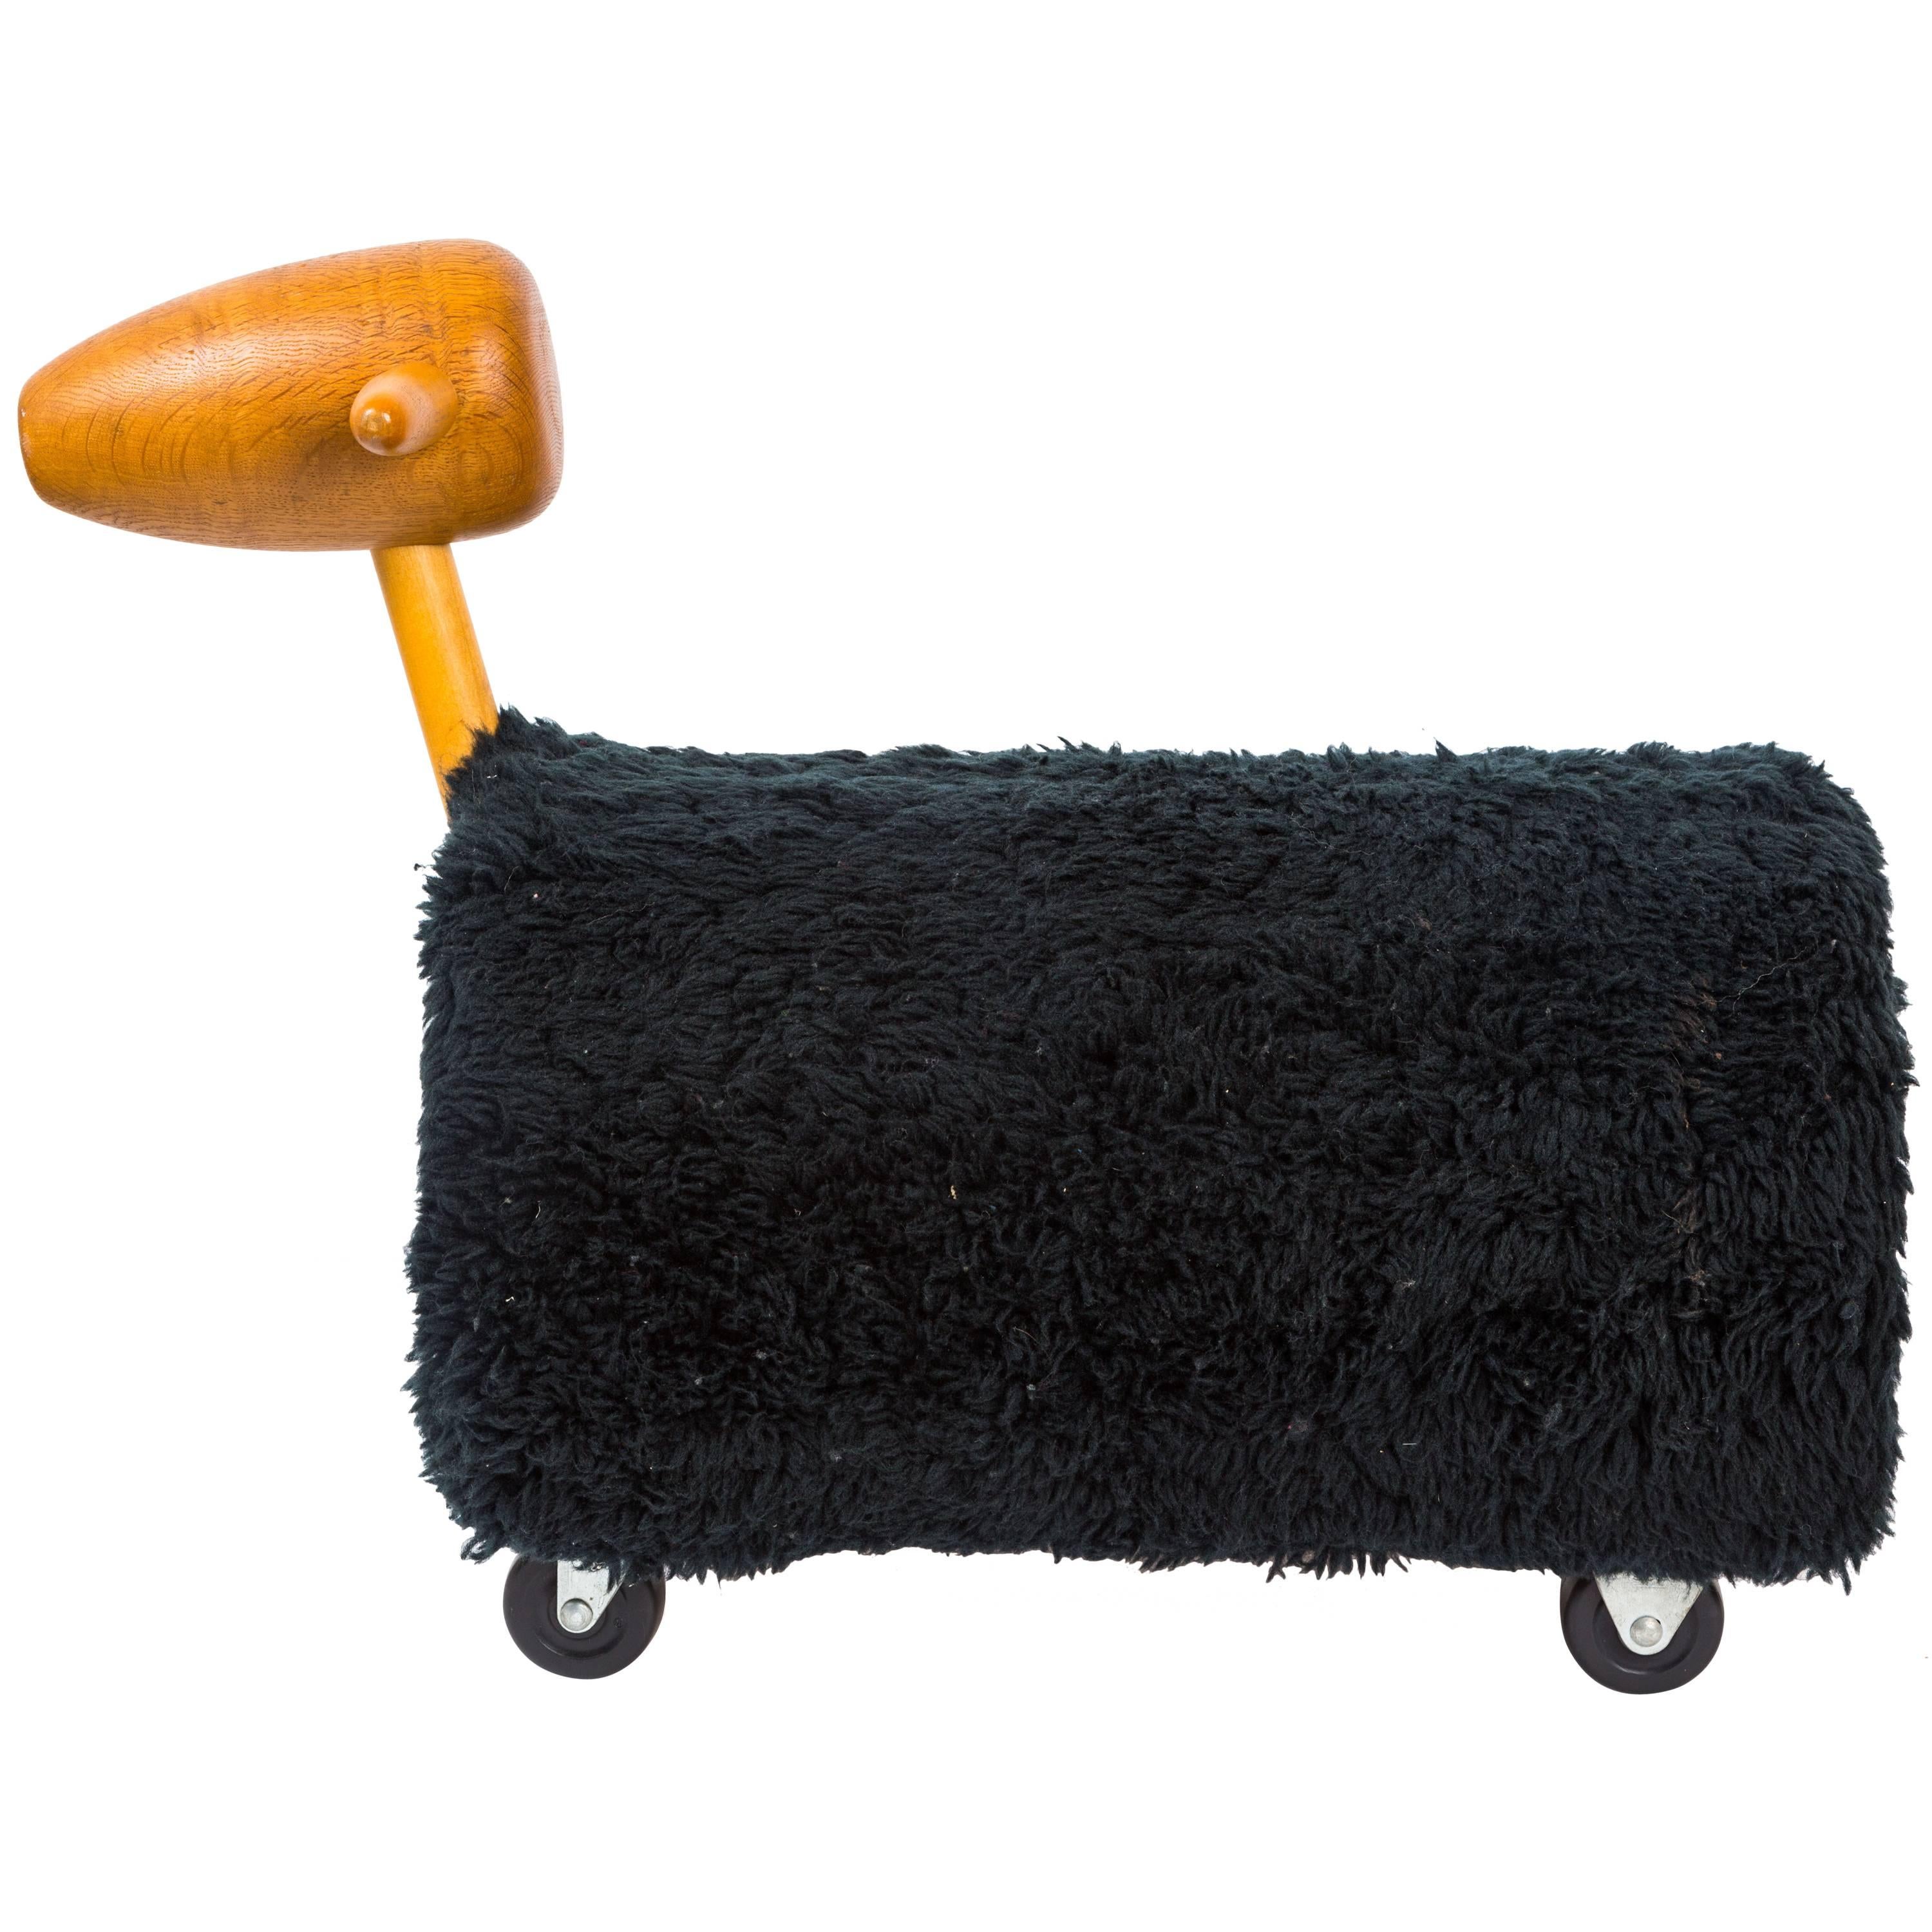 Wood and Wool Sheep by Creative Playthings